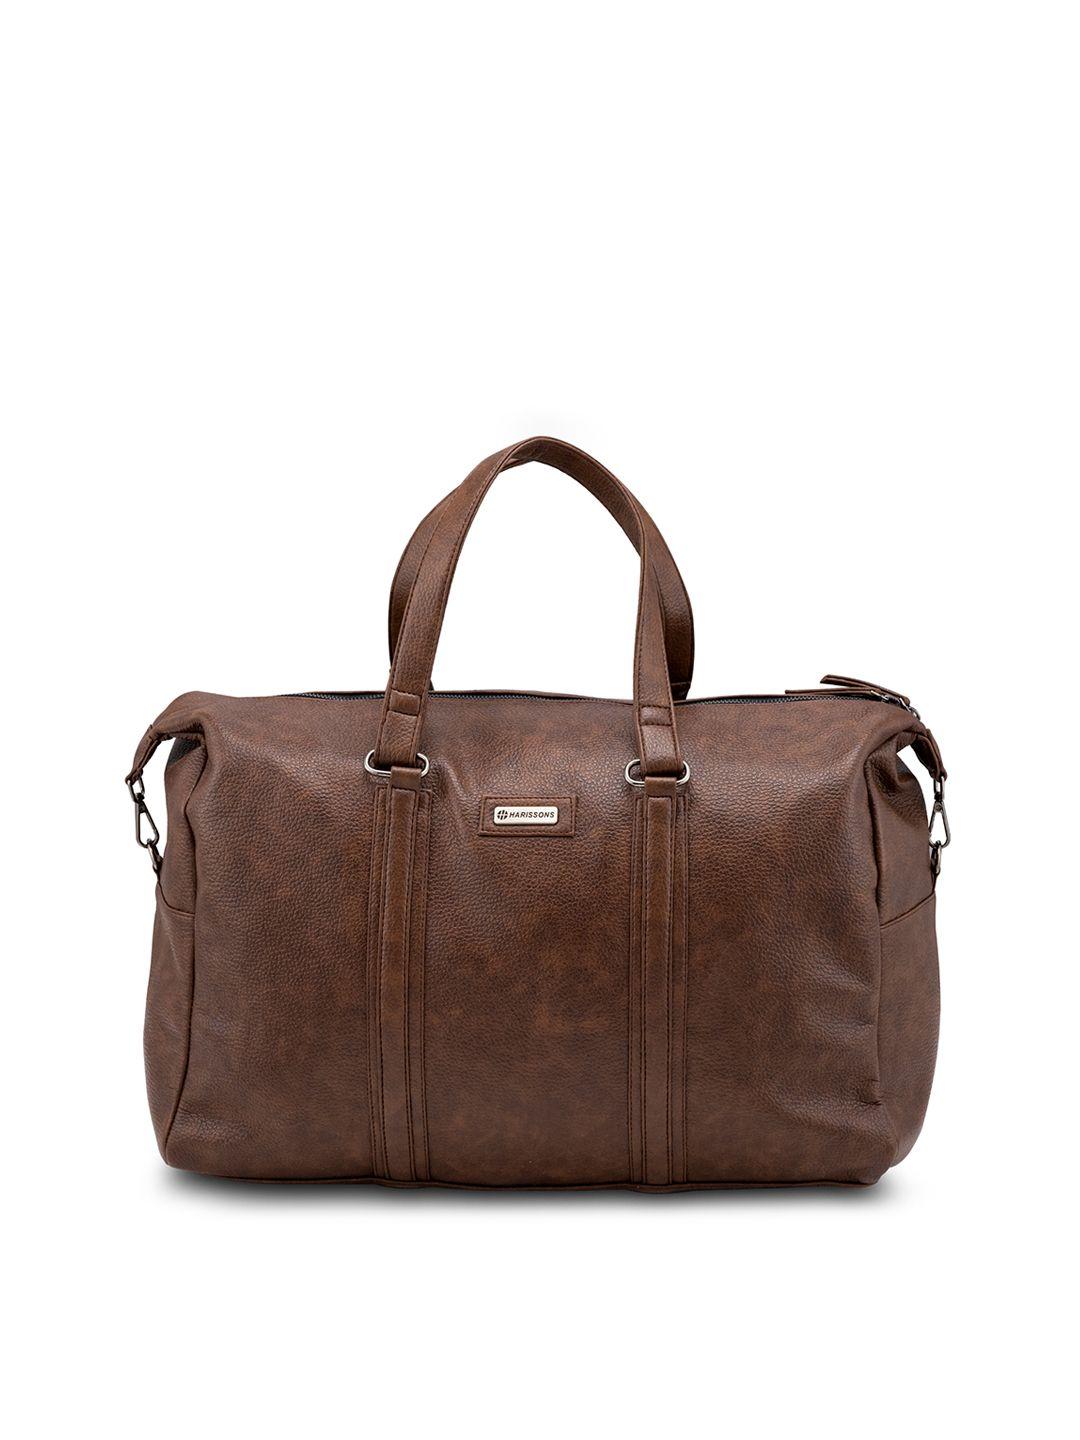 harissons brown textured leather duffel bag